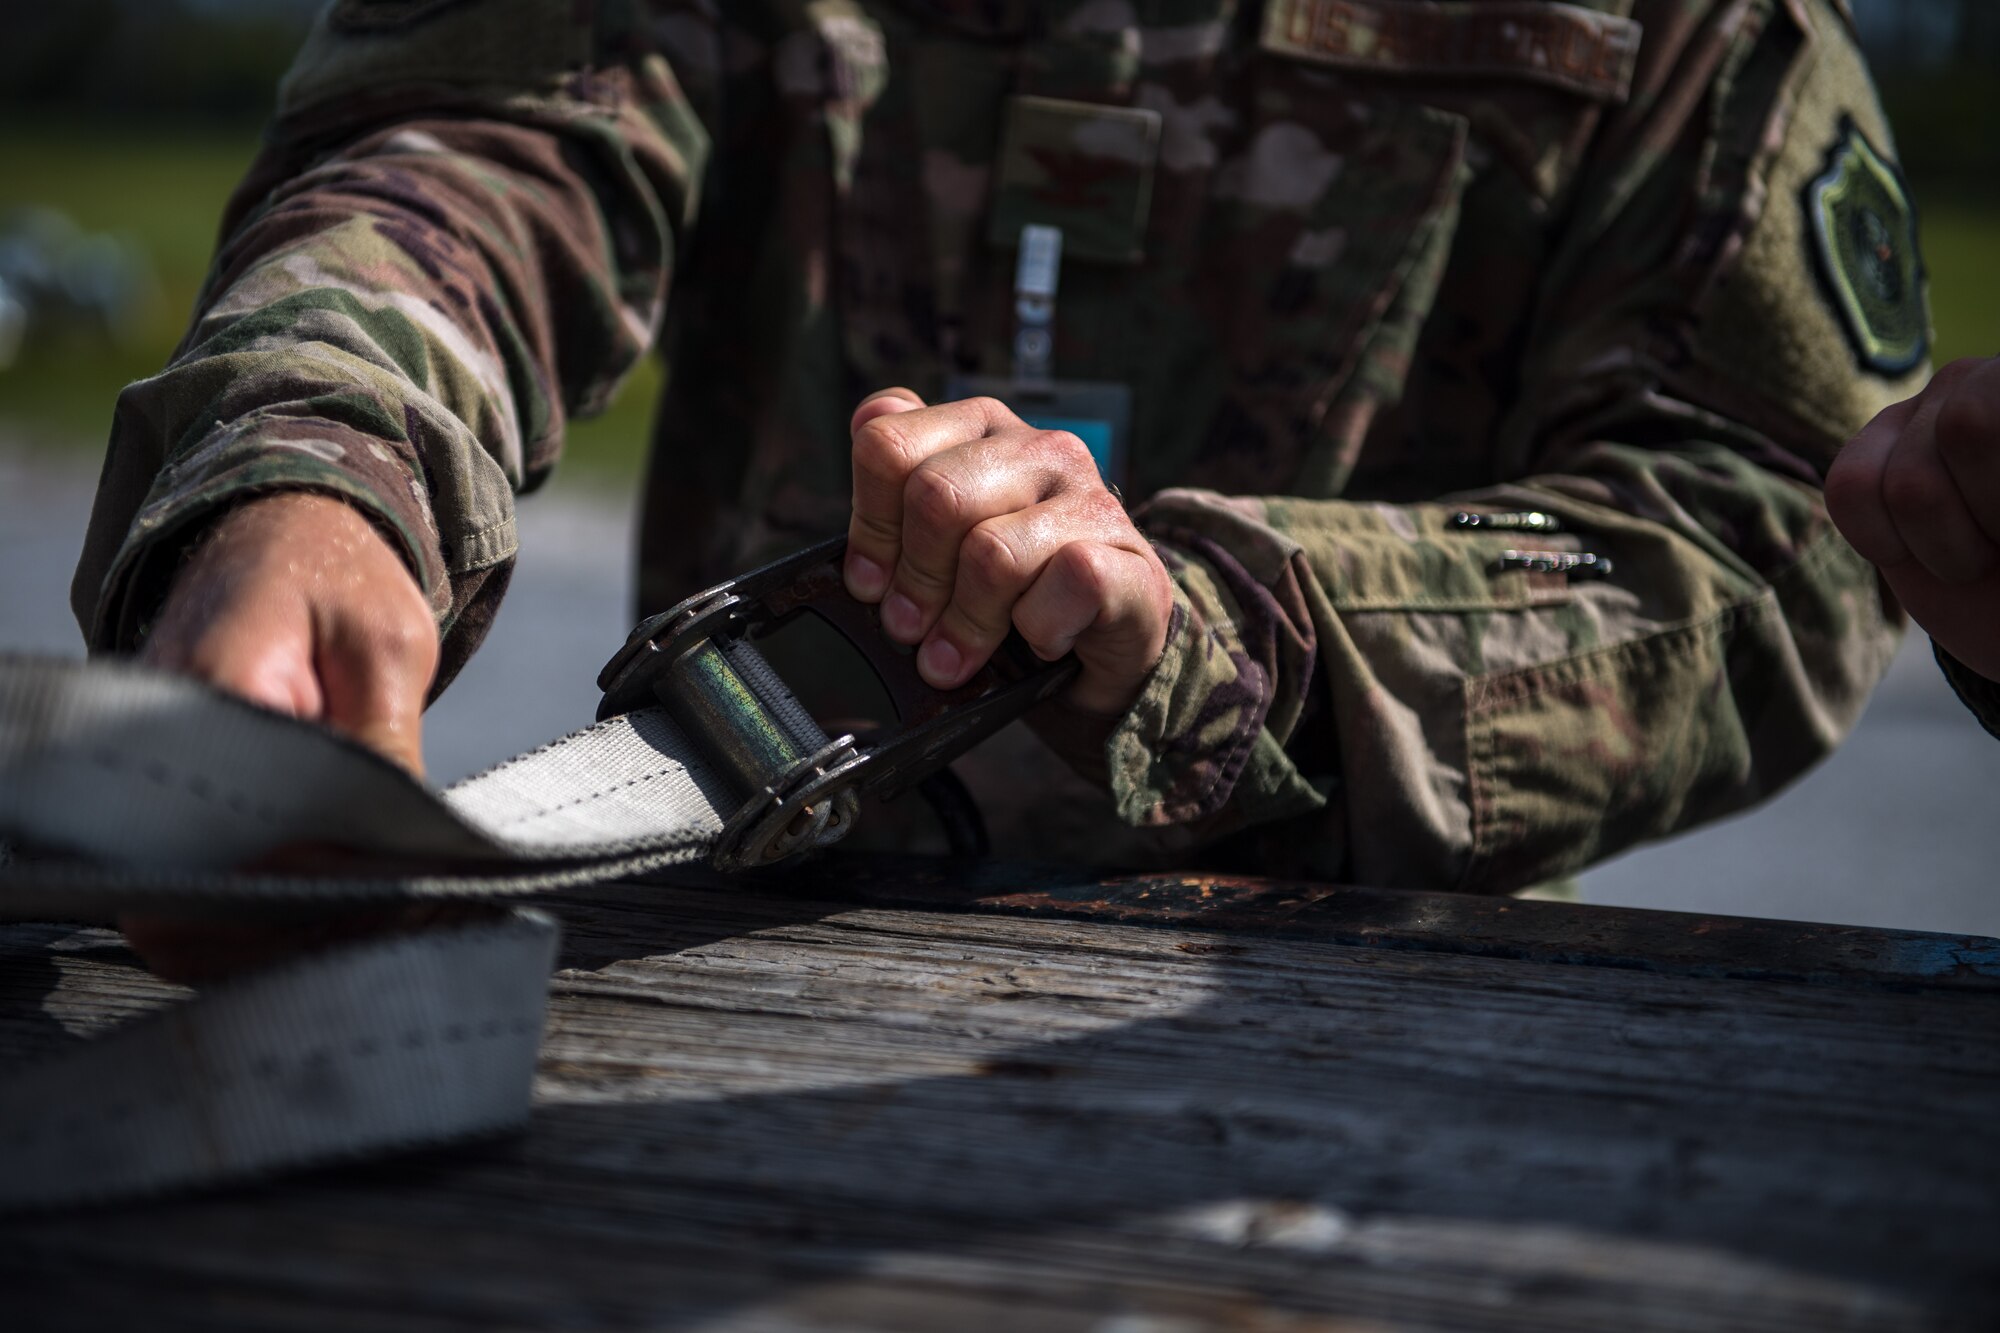 U.S. Air Force Col. Brian Laidlaw, 325th Fighter Wing commander, straps a box of munitions to a flatbed at Tyndall Air Force Base, Florida, July 17, 2019.